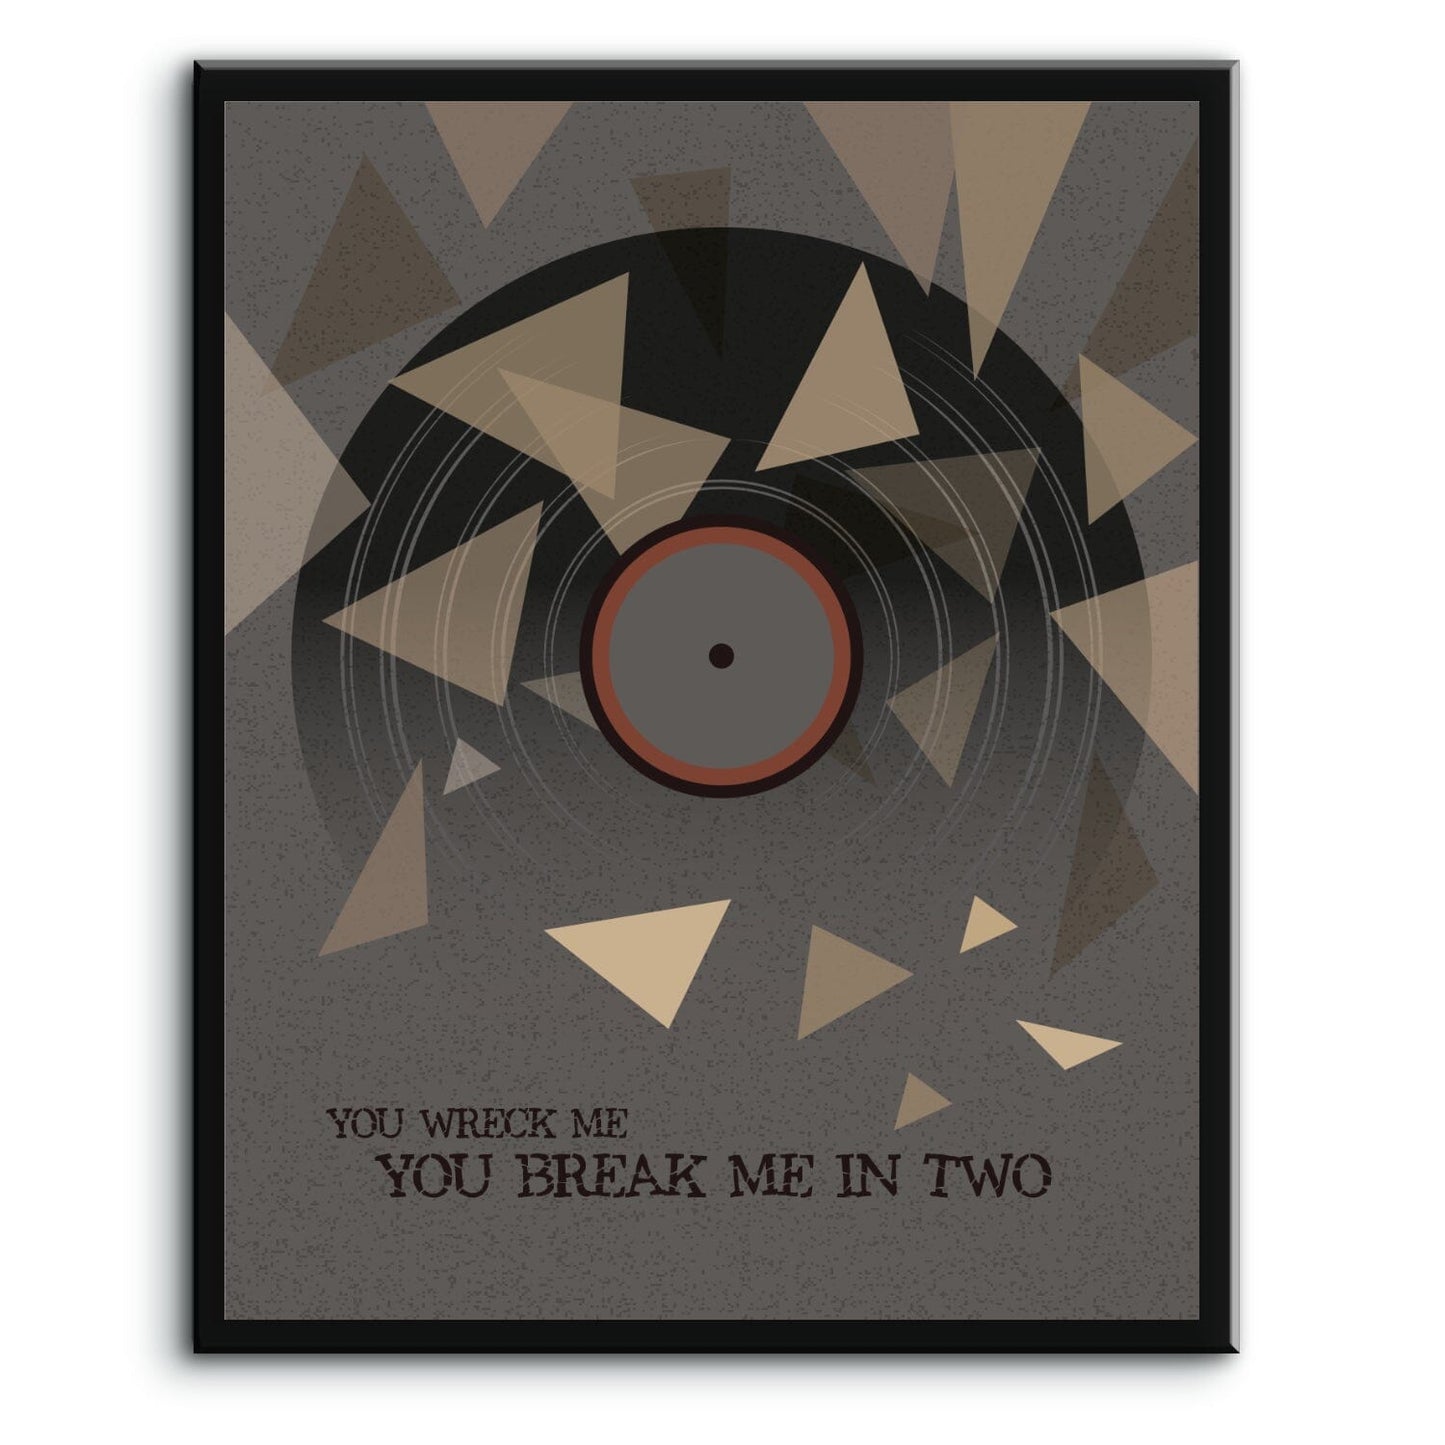 You Wreck me by Tom Petty - Song Lyrics Art Poster Print Song Lyrics Art Song Lyrics Art 8x10 Plaque Mount 